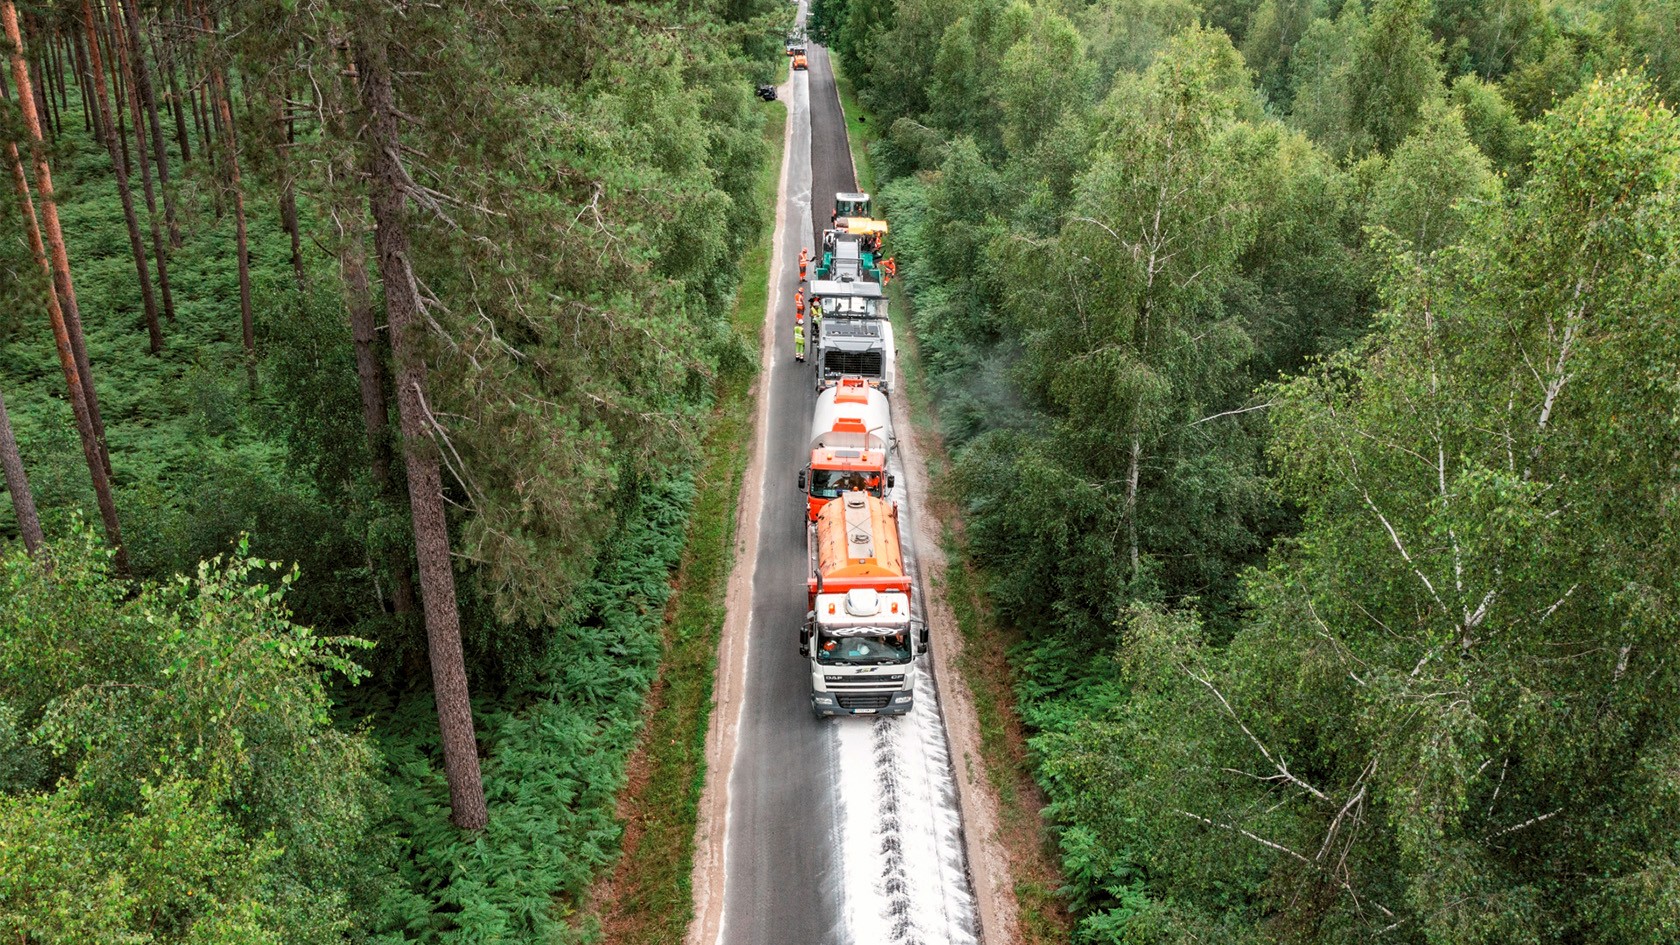 In-place cold recycling cuts emissions and conserves resources during the rehabilitation of a link road in Yvelines, France.